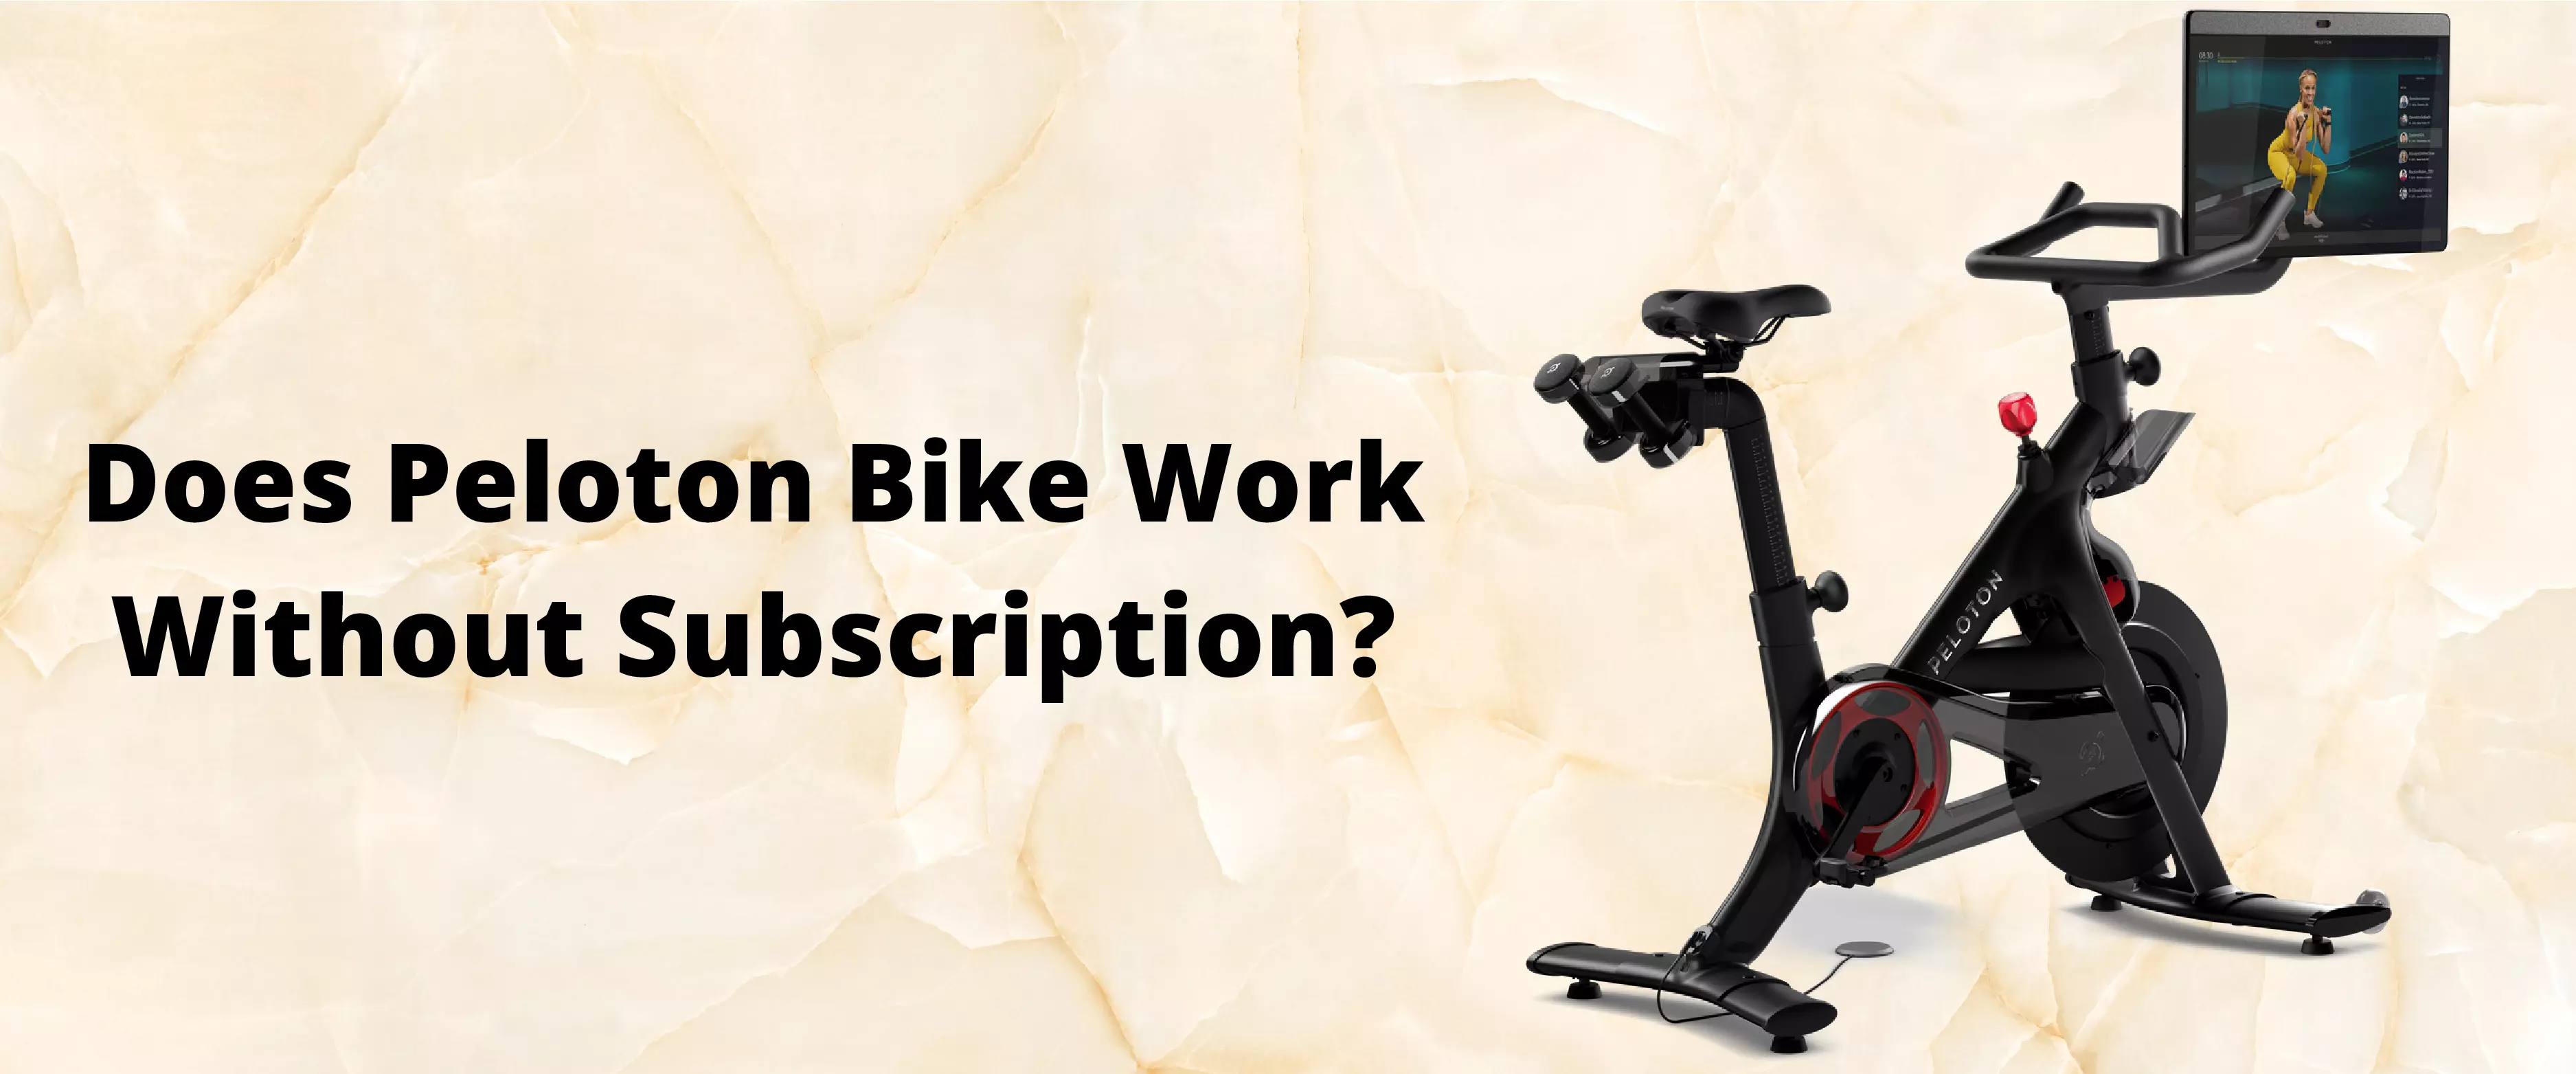 Does Peloton Bike Work Without Subscription